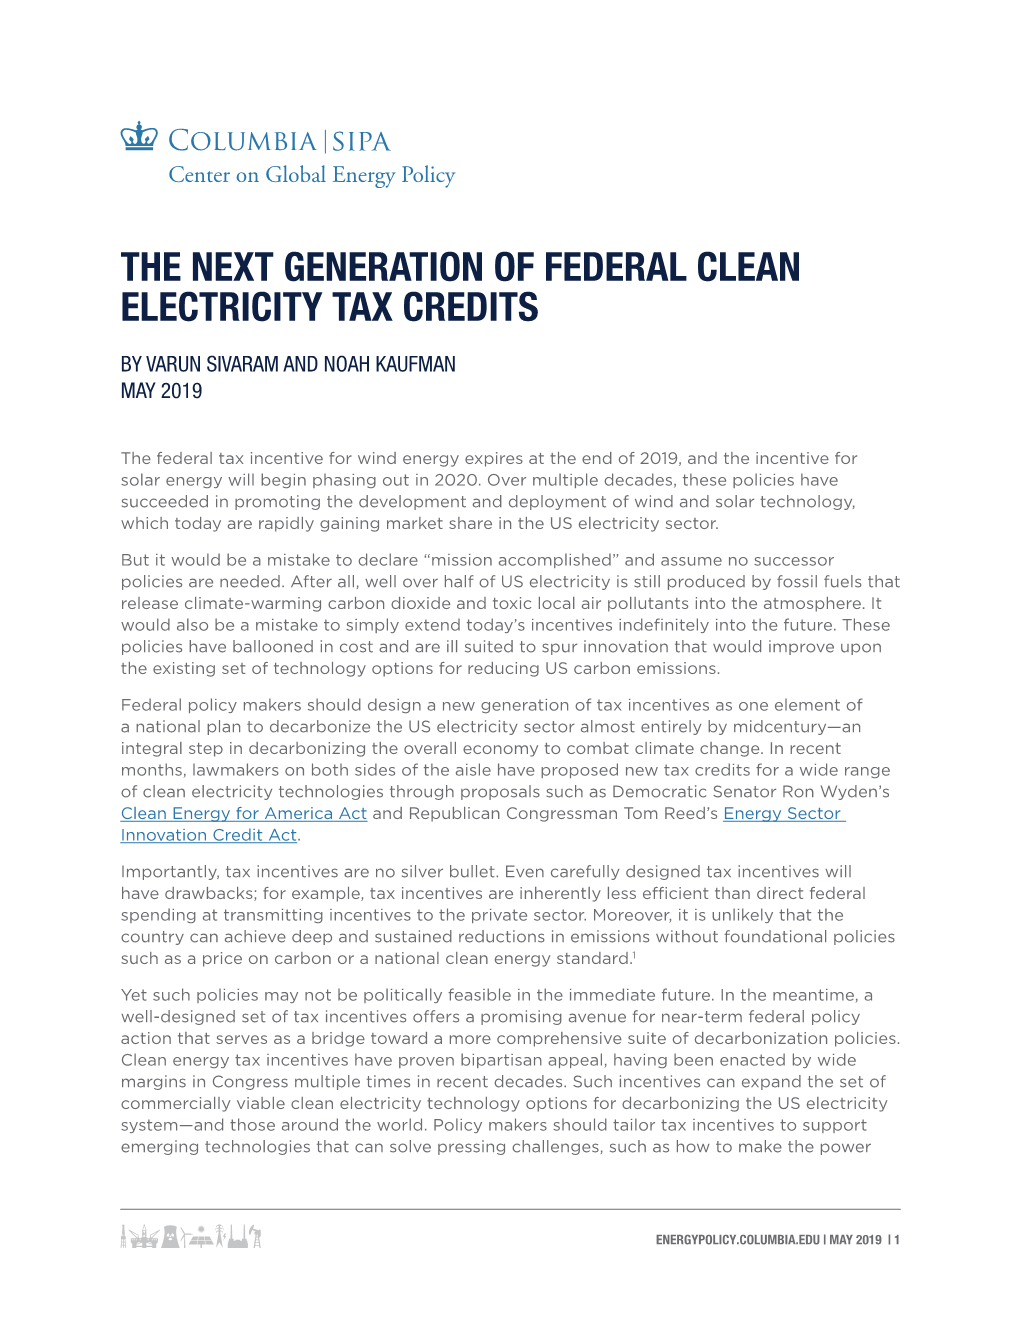 The Next Generation of Federal Clean Electricity Tax Credits